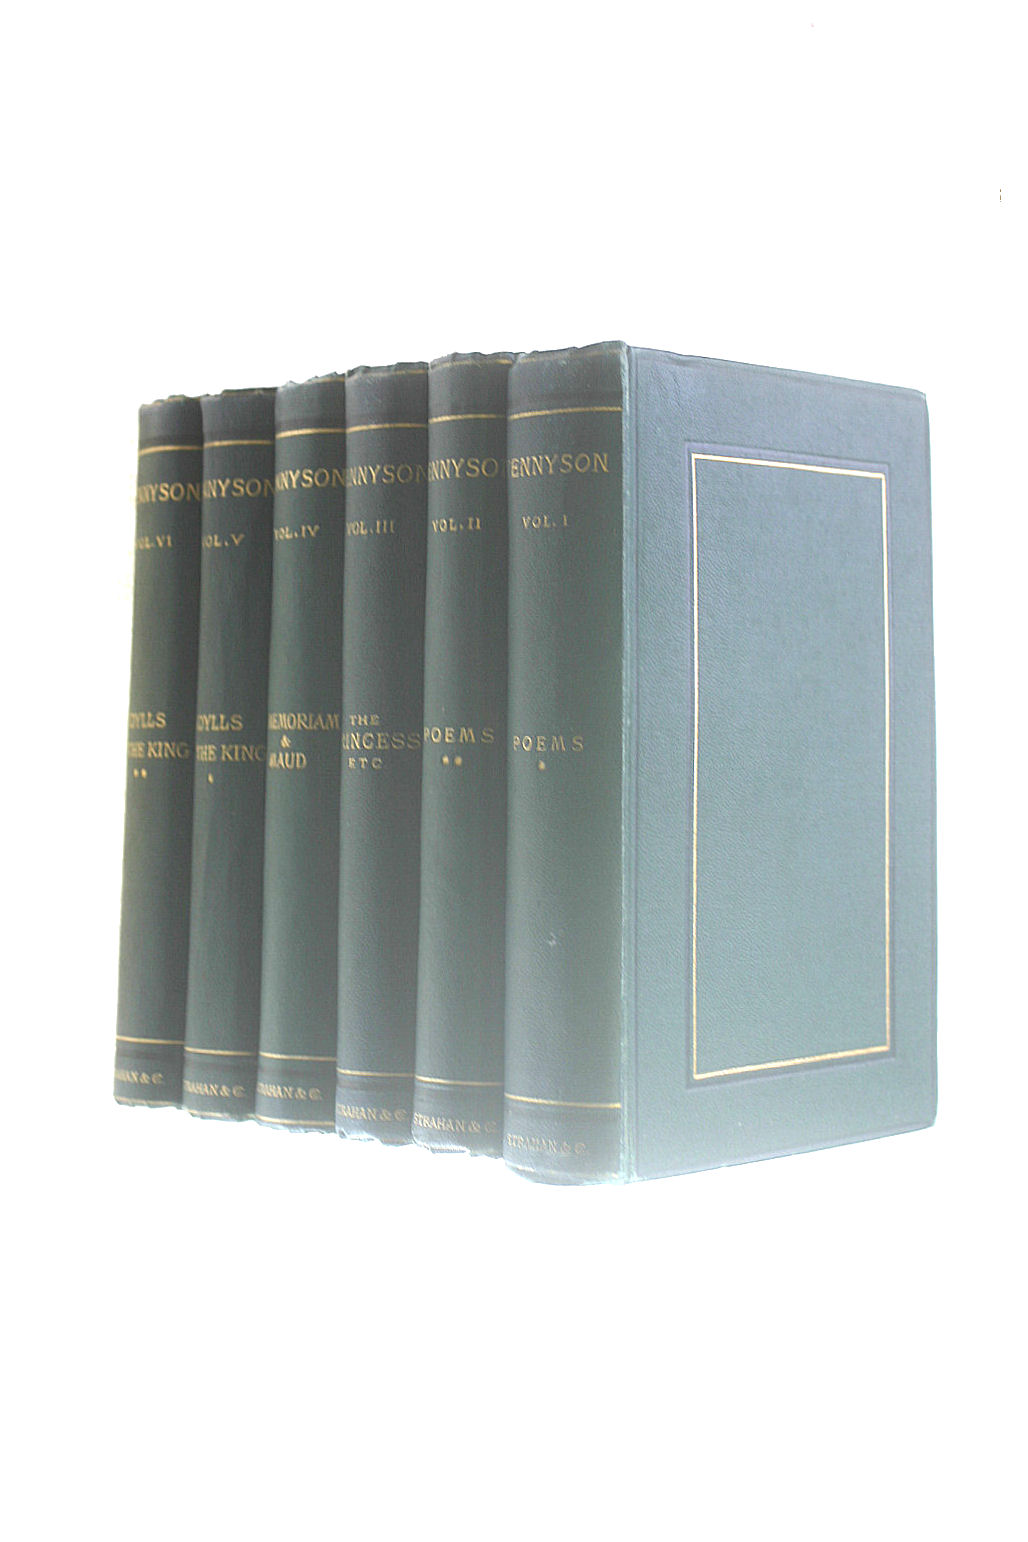 TENNYSON. ALFRED - The Works of Alfred Tennyson. Poet Laureate in Six Volumes